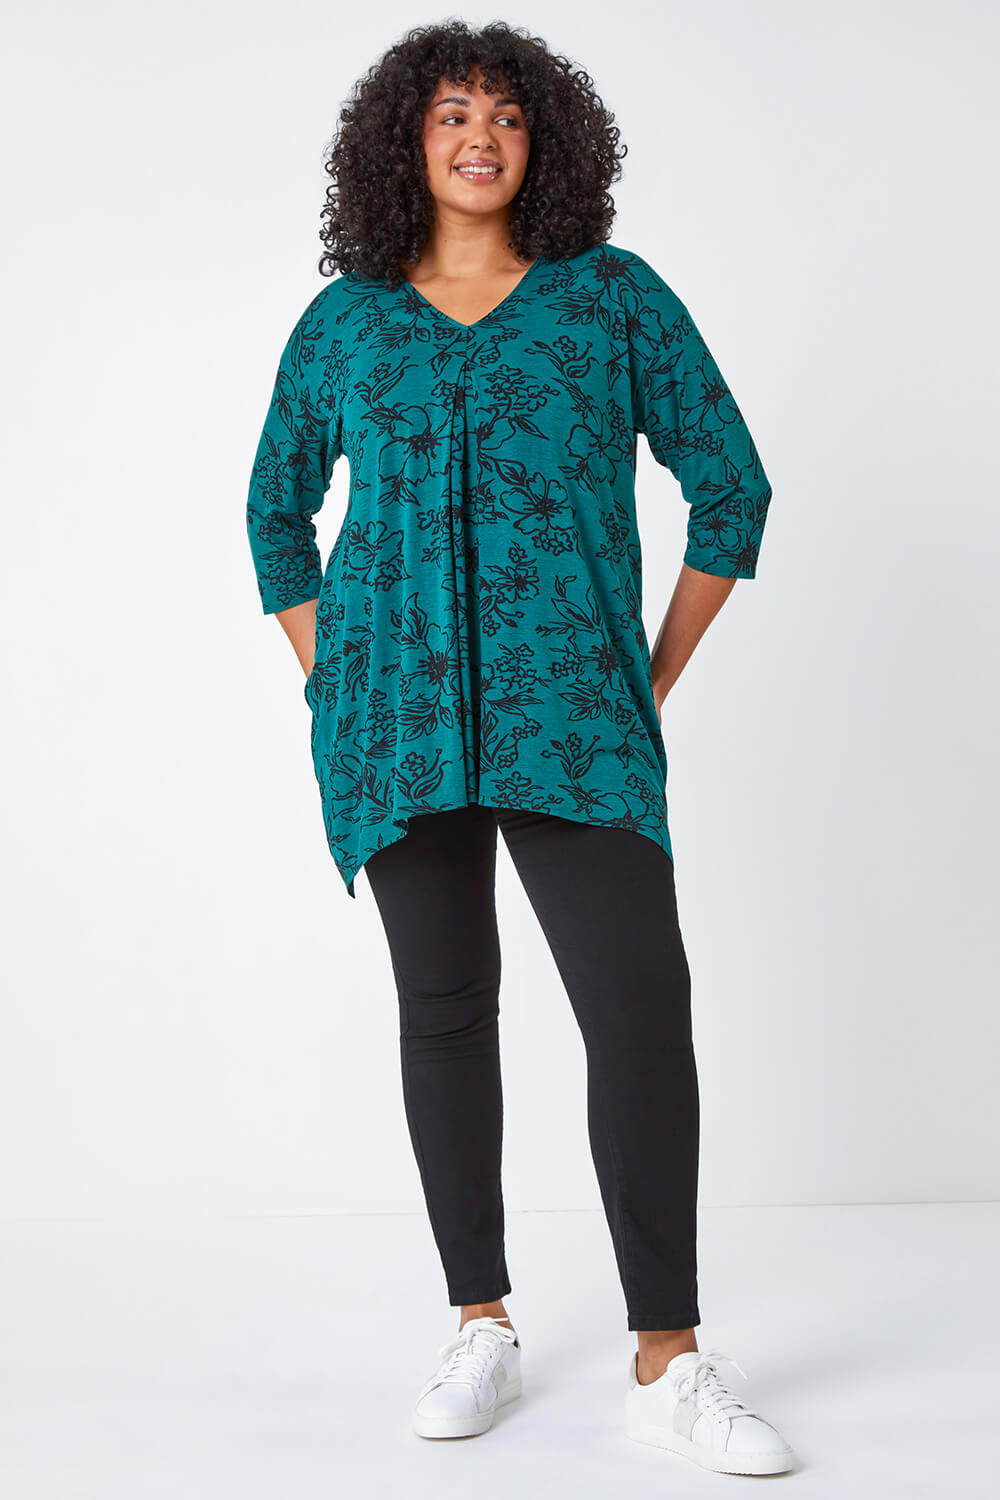 Green Curve Tie Back Floral Tunic Stretch Top, Image 2 of 5